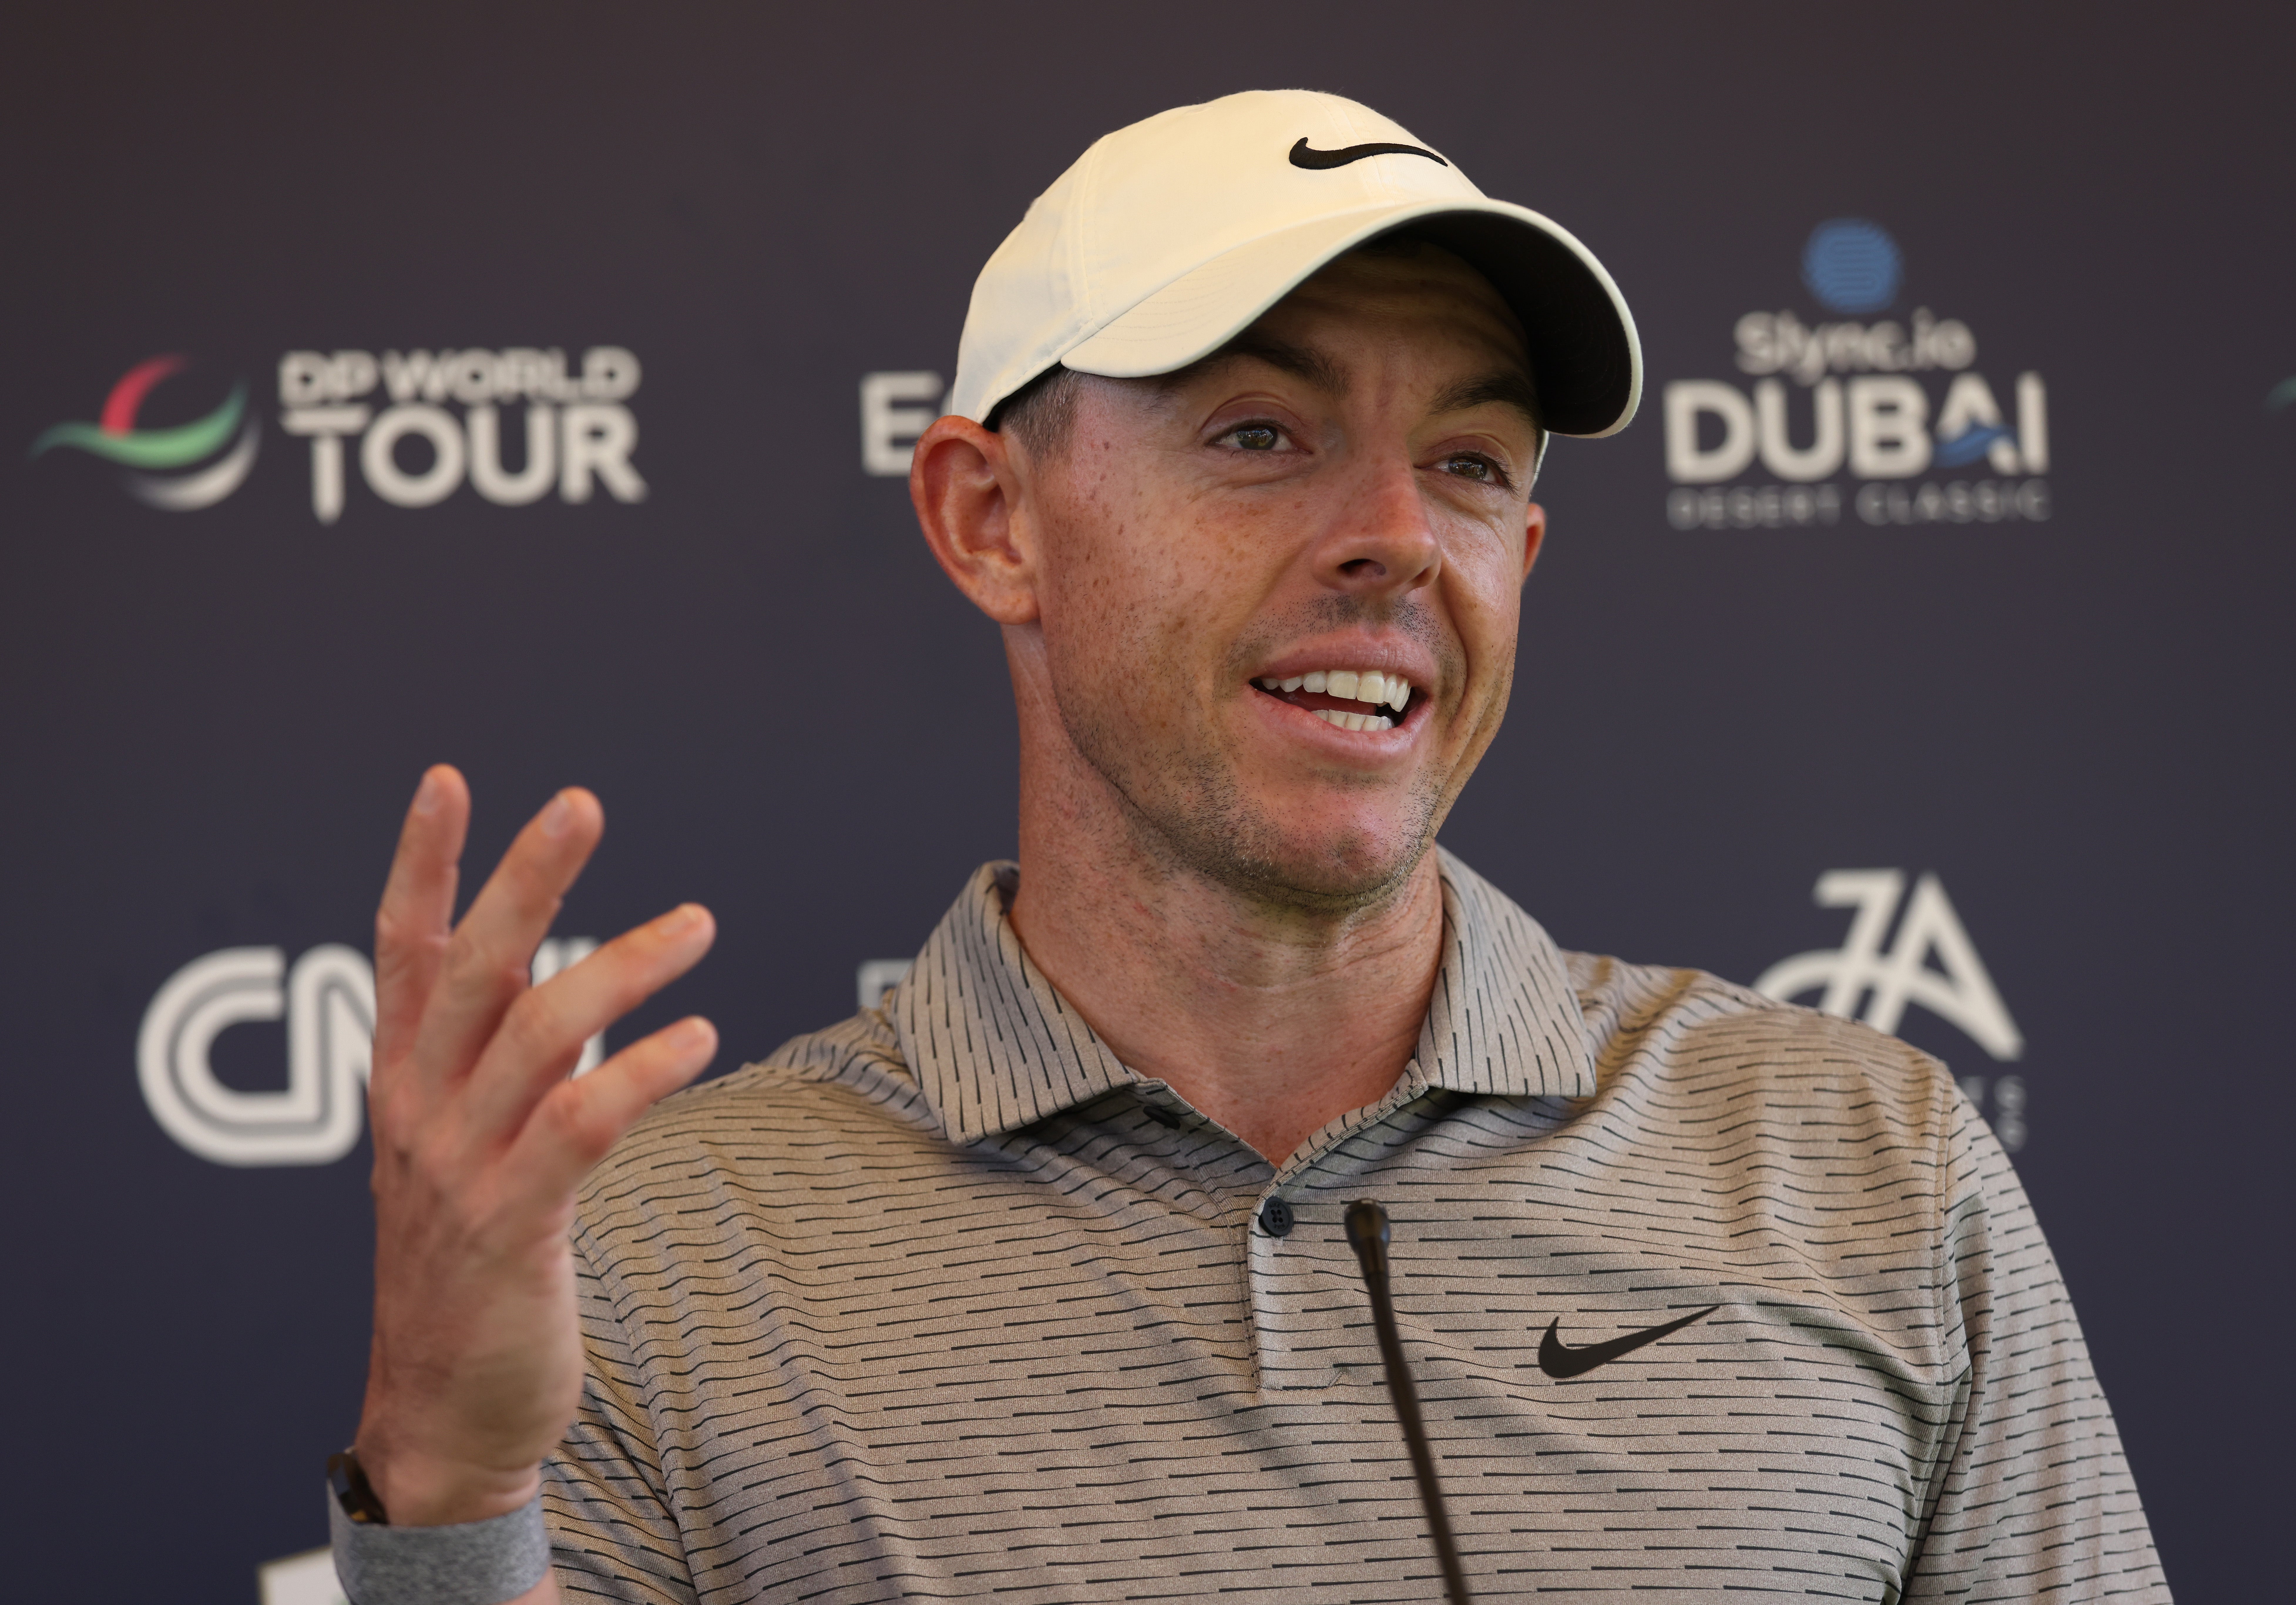 The four-time major winner lived in Dubai for four years